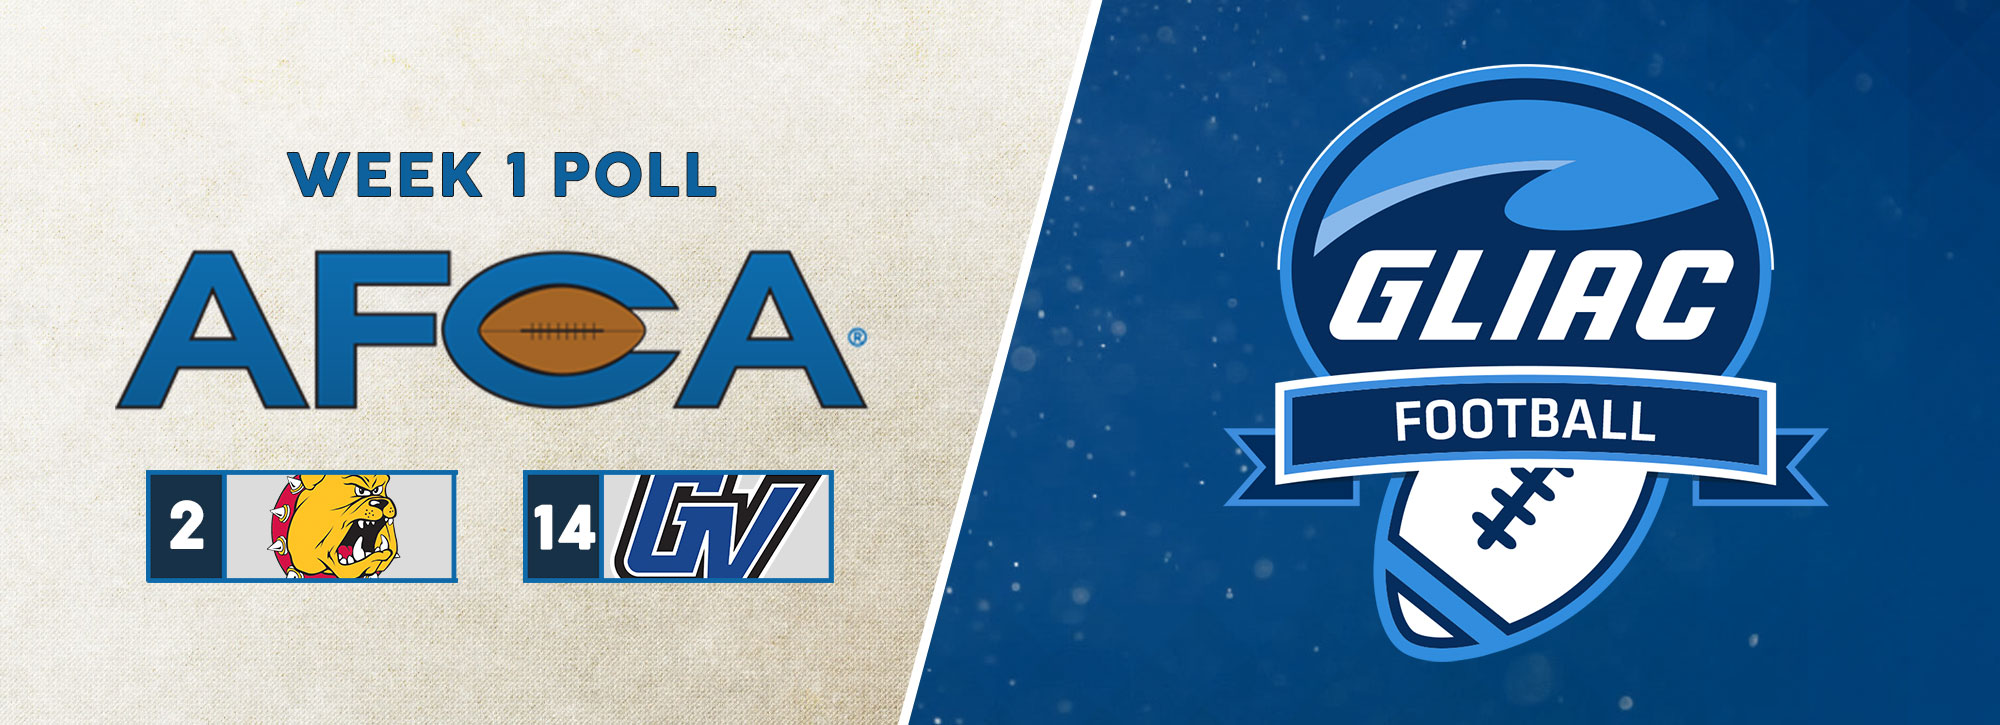 Ferris State No. 2, Grand Valley State No. 14 in AFCA Week 1 Poll